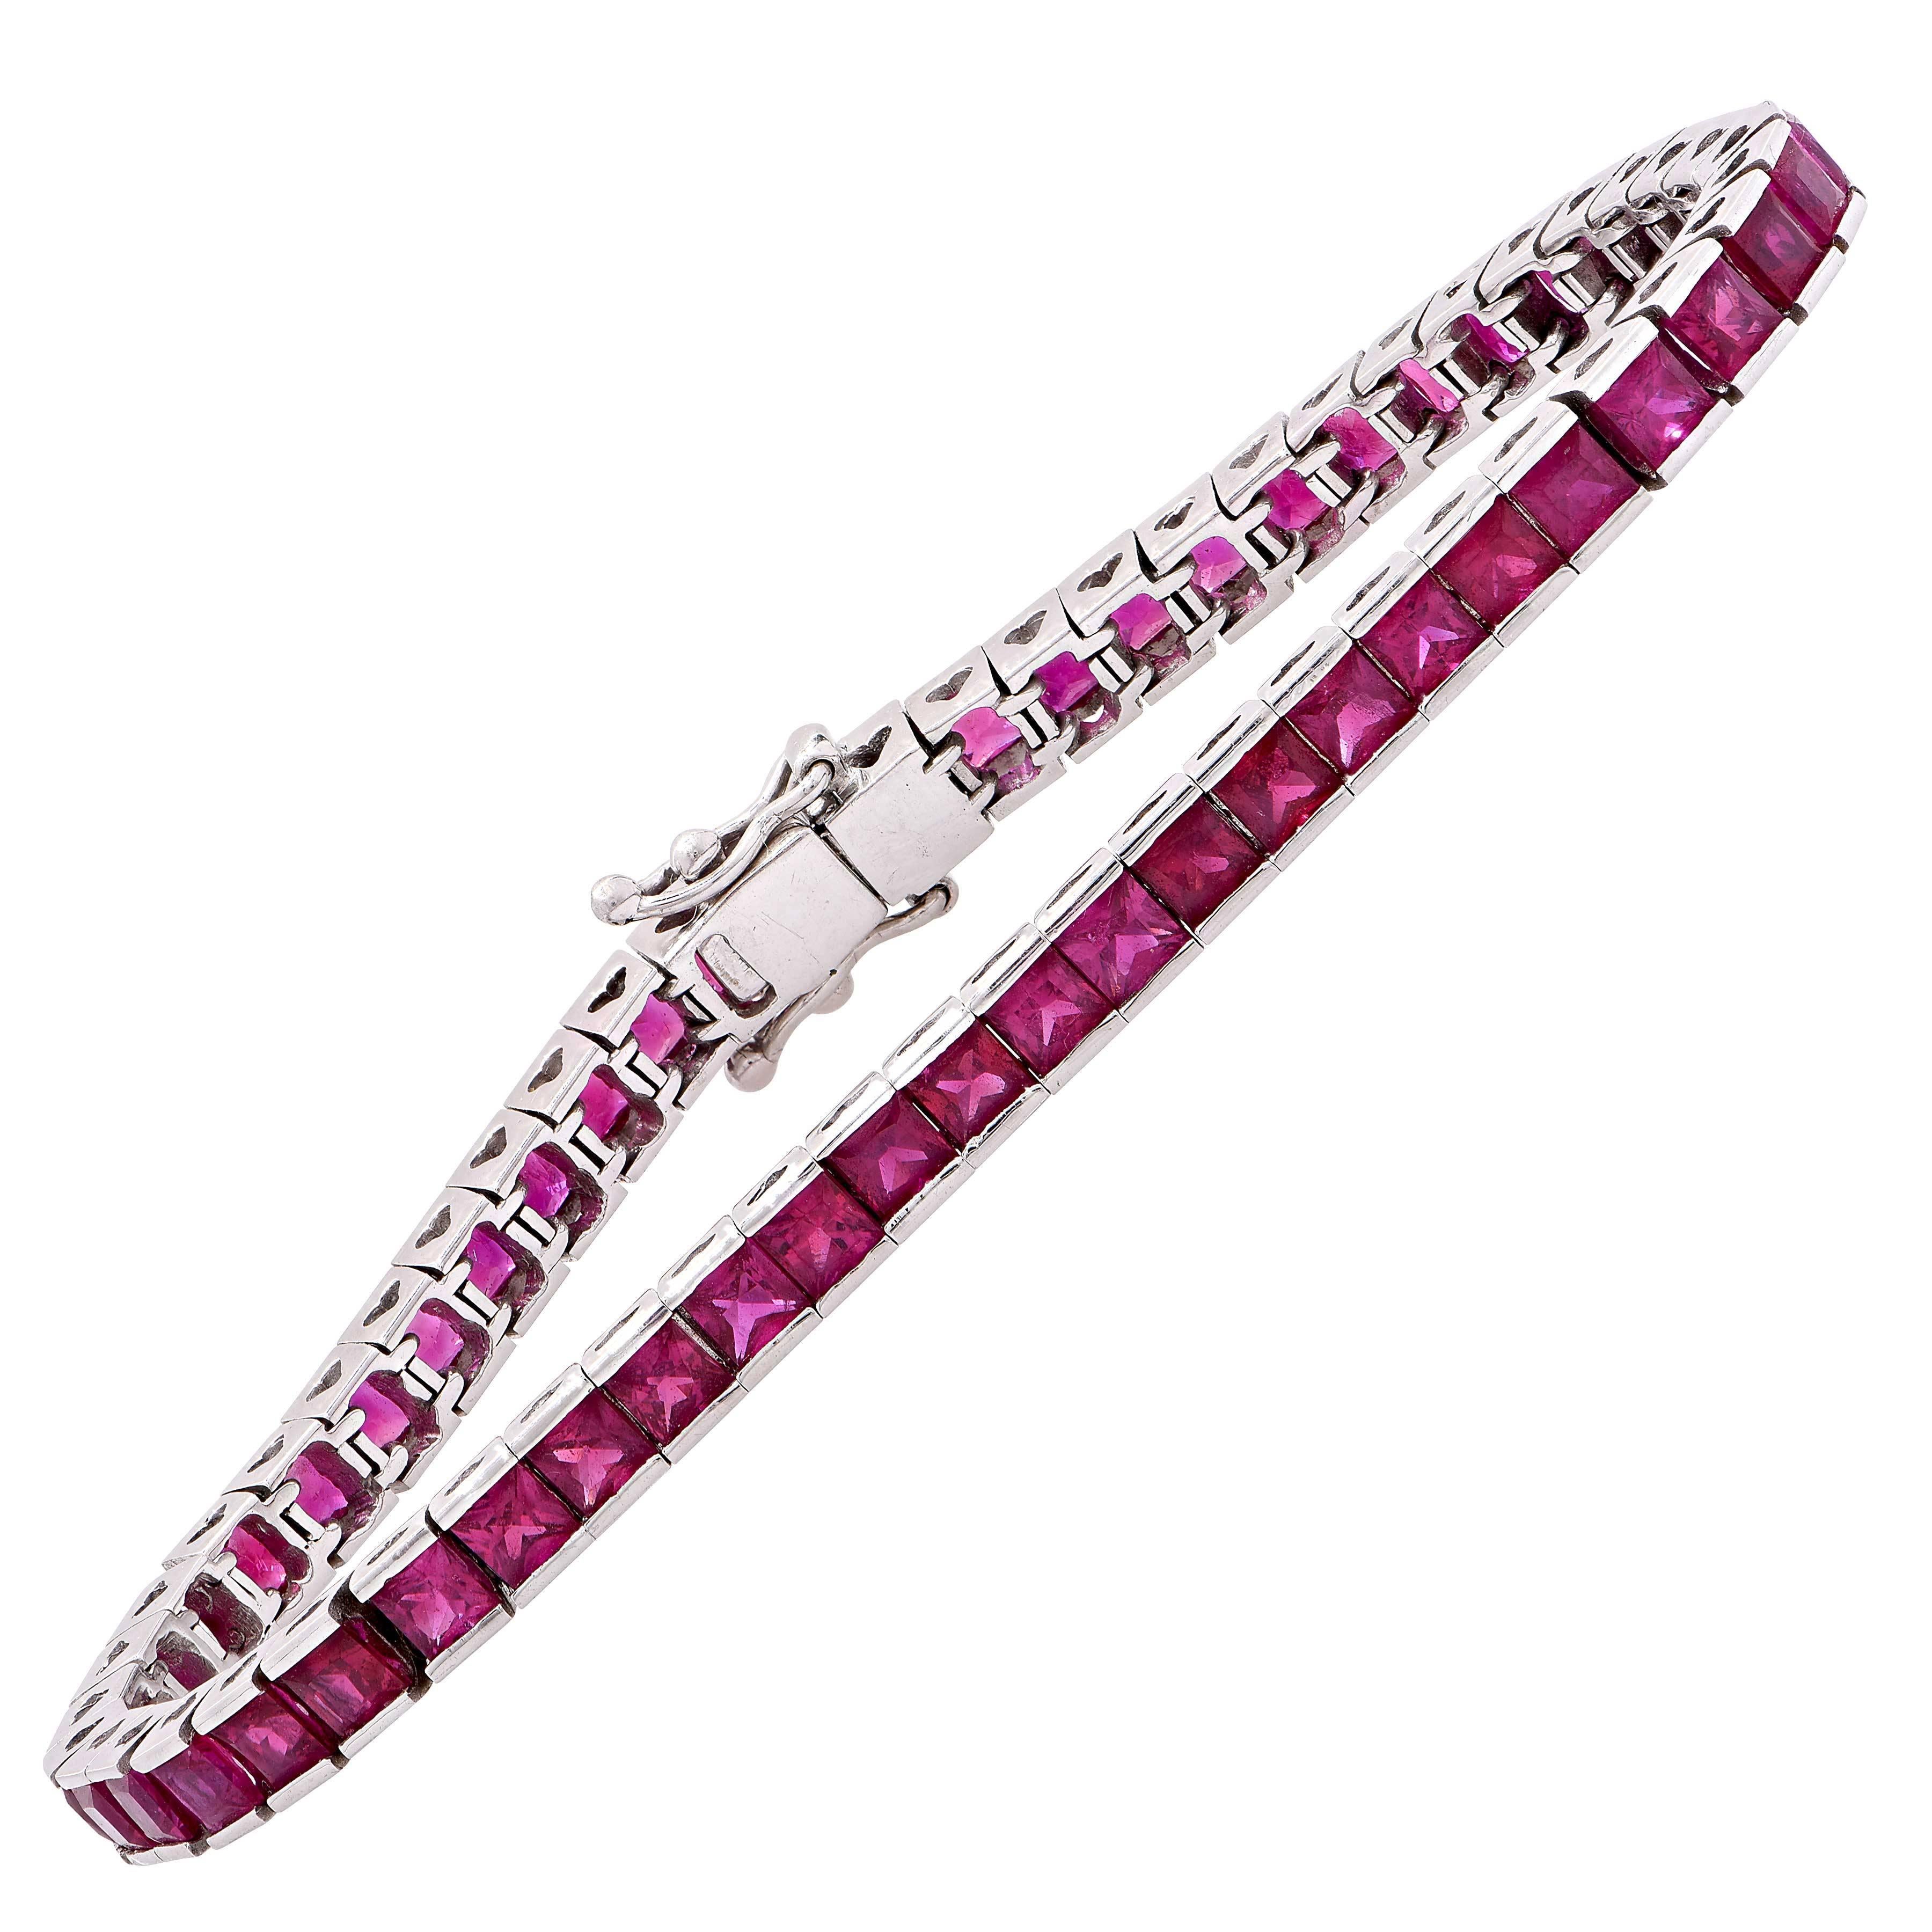 Ruby straight line bracelet set with 46 rubies weighing approximately 9.35 carats.

Metal Type: 18 KT White Gold
Metal Weight: 